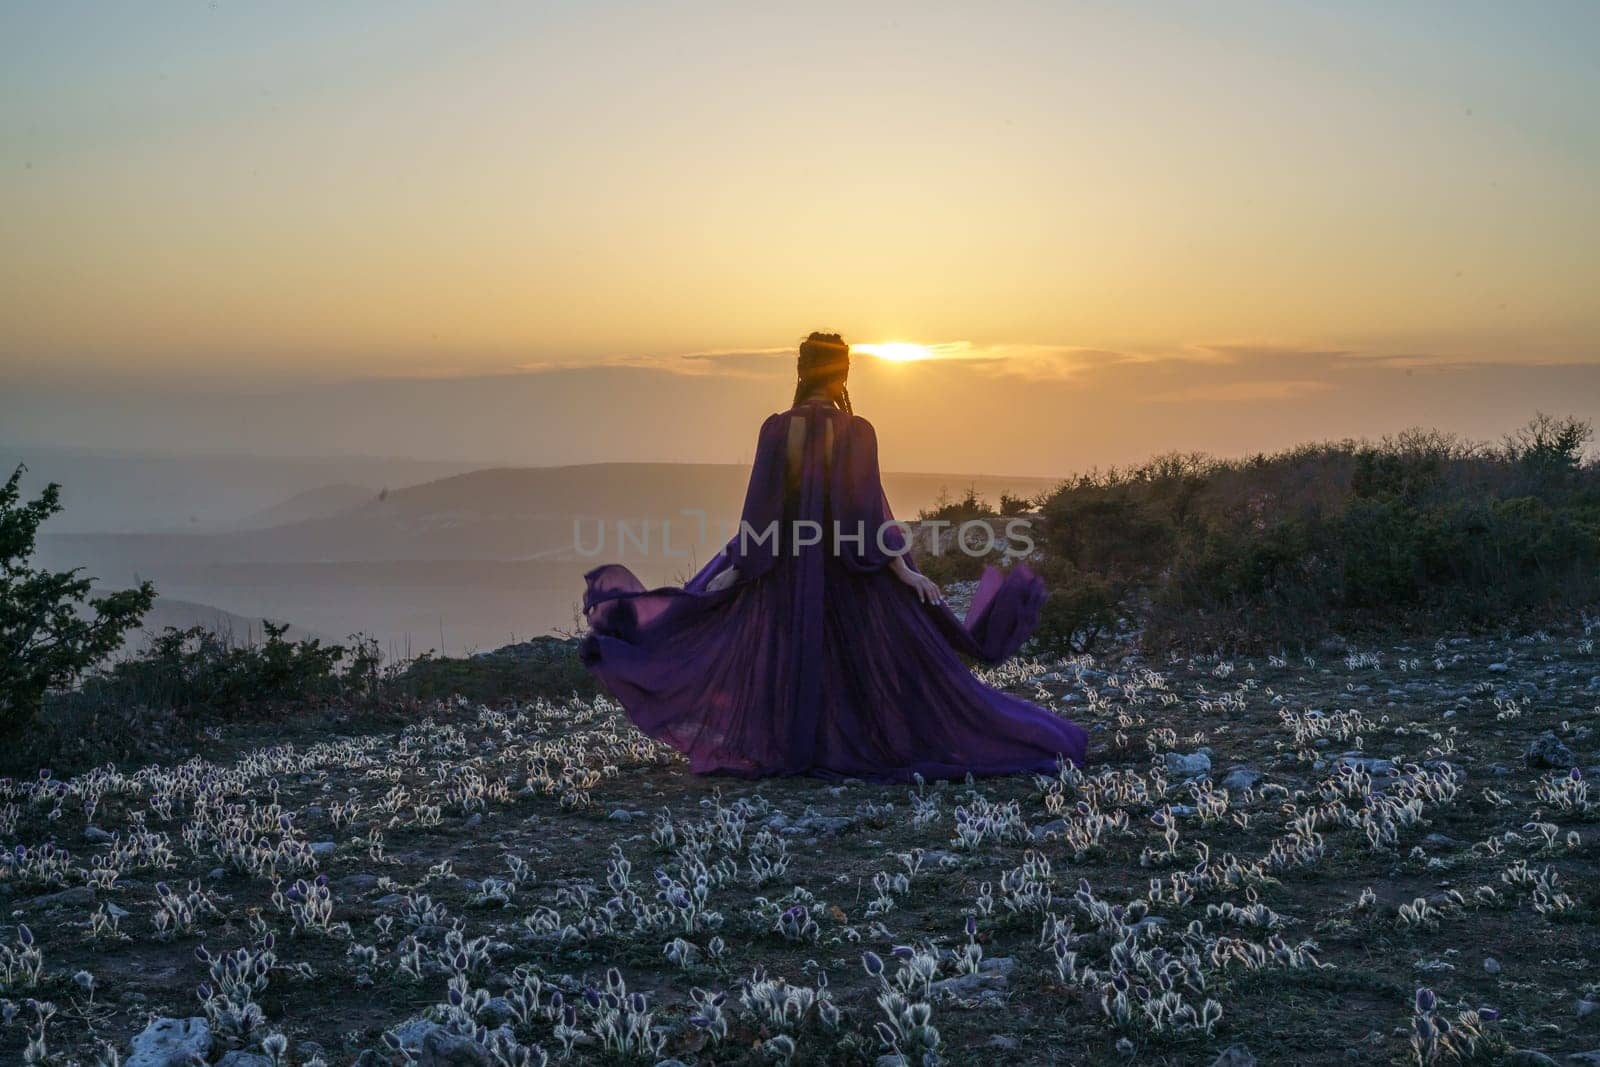 Sunset purple dress woman mountains. Rise of the mystic. sunset over the clouds with a girl in a long purple dress. In the meadow there is a grass dream with purple flowers. by Matiunina